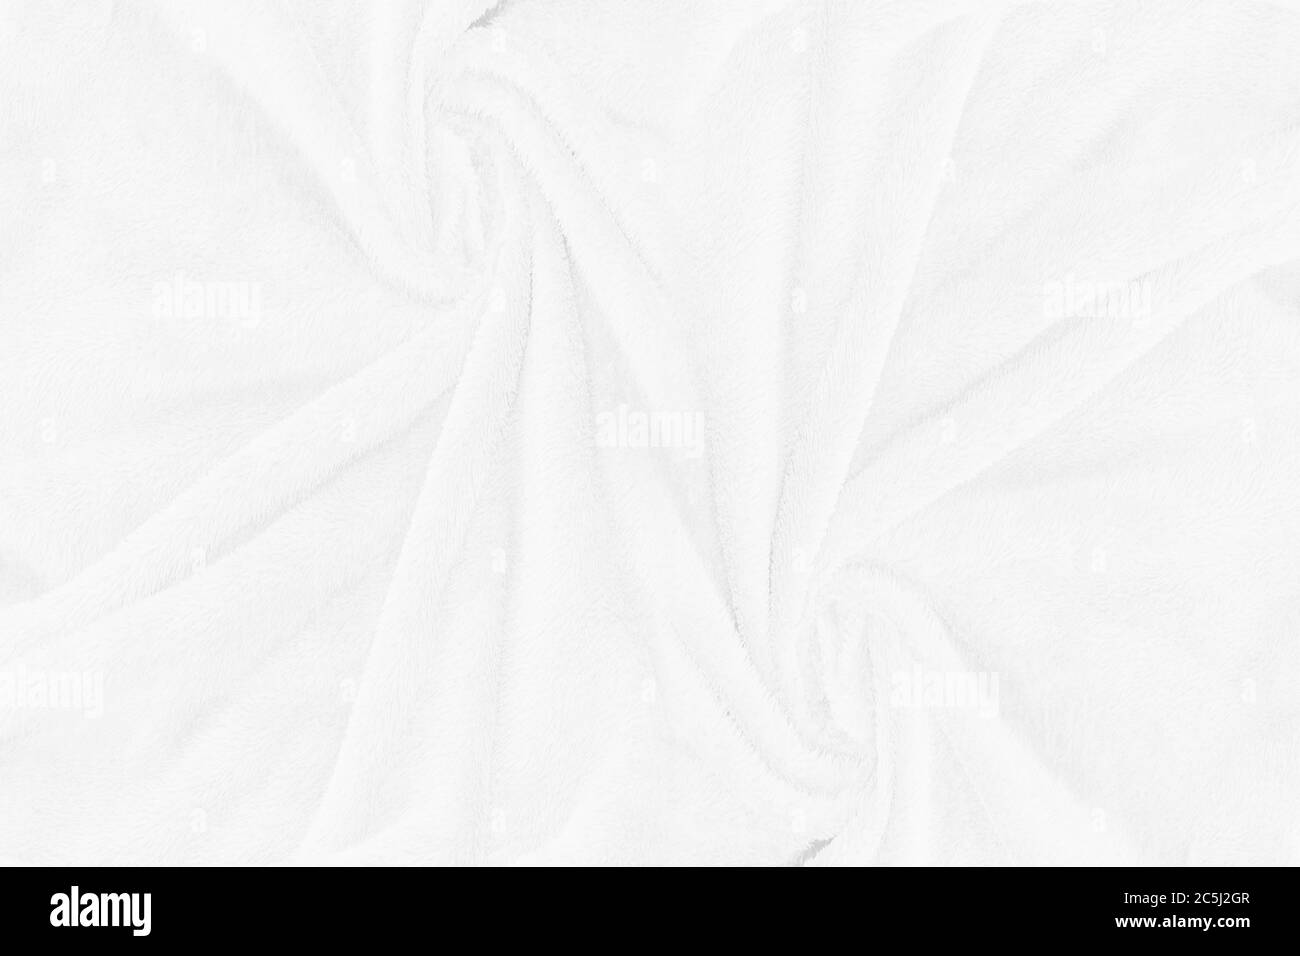 White cloth texture with soft waves. crumpled fabric background. Stock Photo